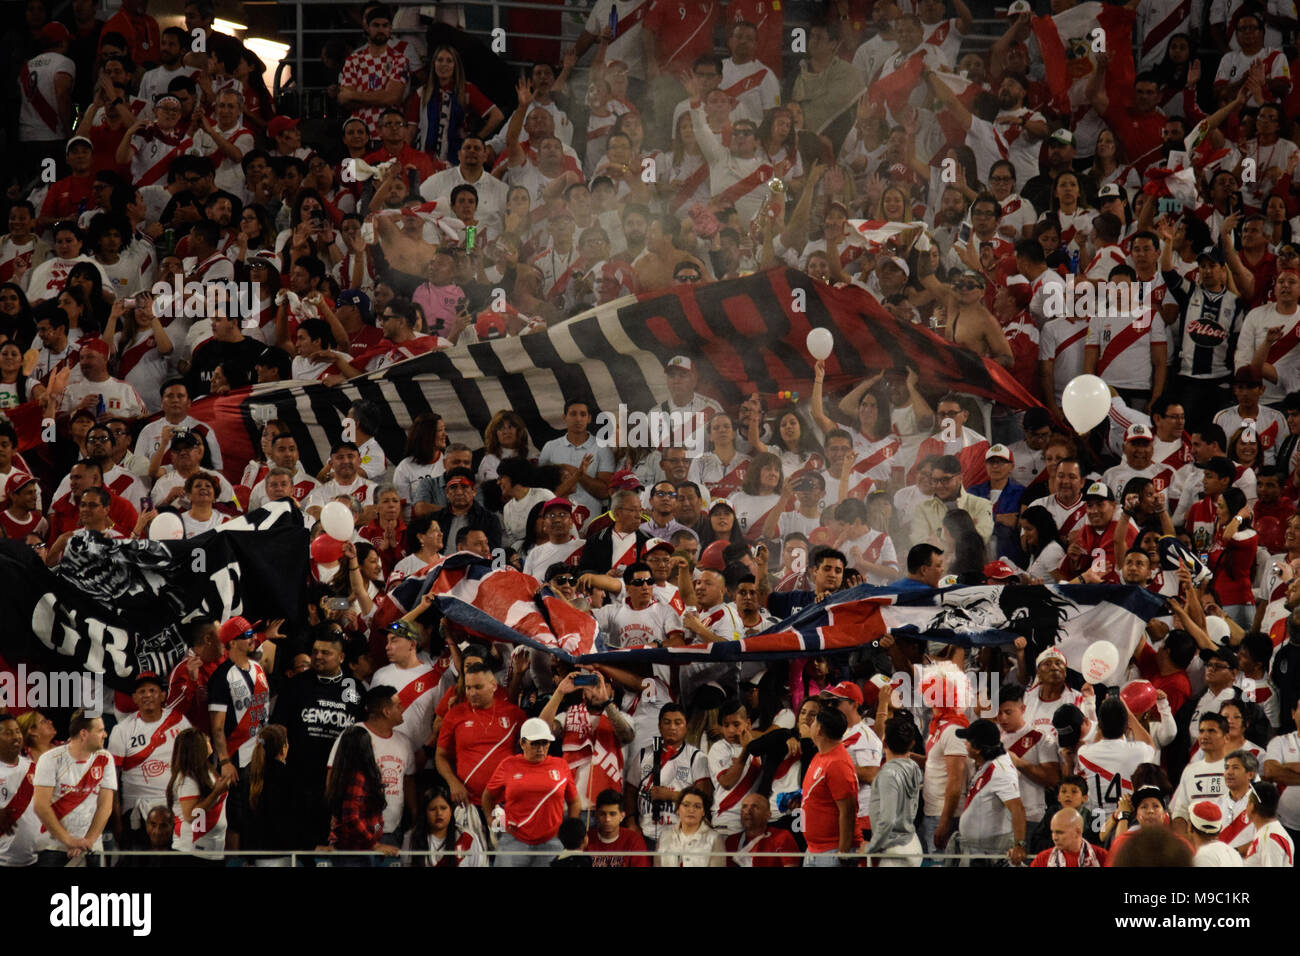 Miami, Florida, USA. 23rd Mar, 2018. The supporters of Peru were present at the Hard Rock Stadium filling most of them and making a show to receive their team who was 32 years old without reaching a world cup.The Croatian national football team played a friendly match against Peru on 23rd March 2018. Credit: Fernando Oduber/SOPA Images/ZUMA Wire/Alamy Live News Stock Photo